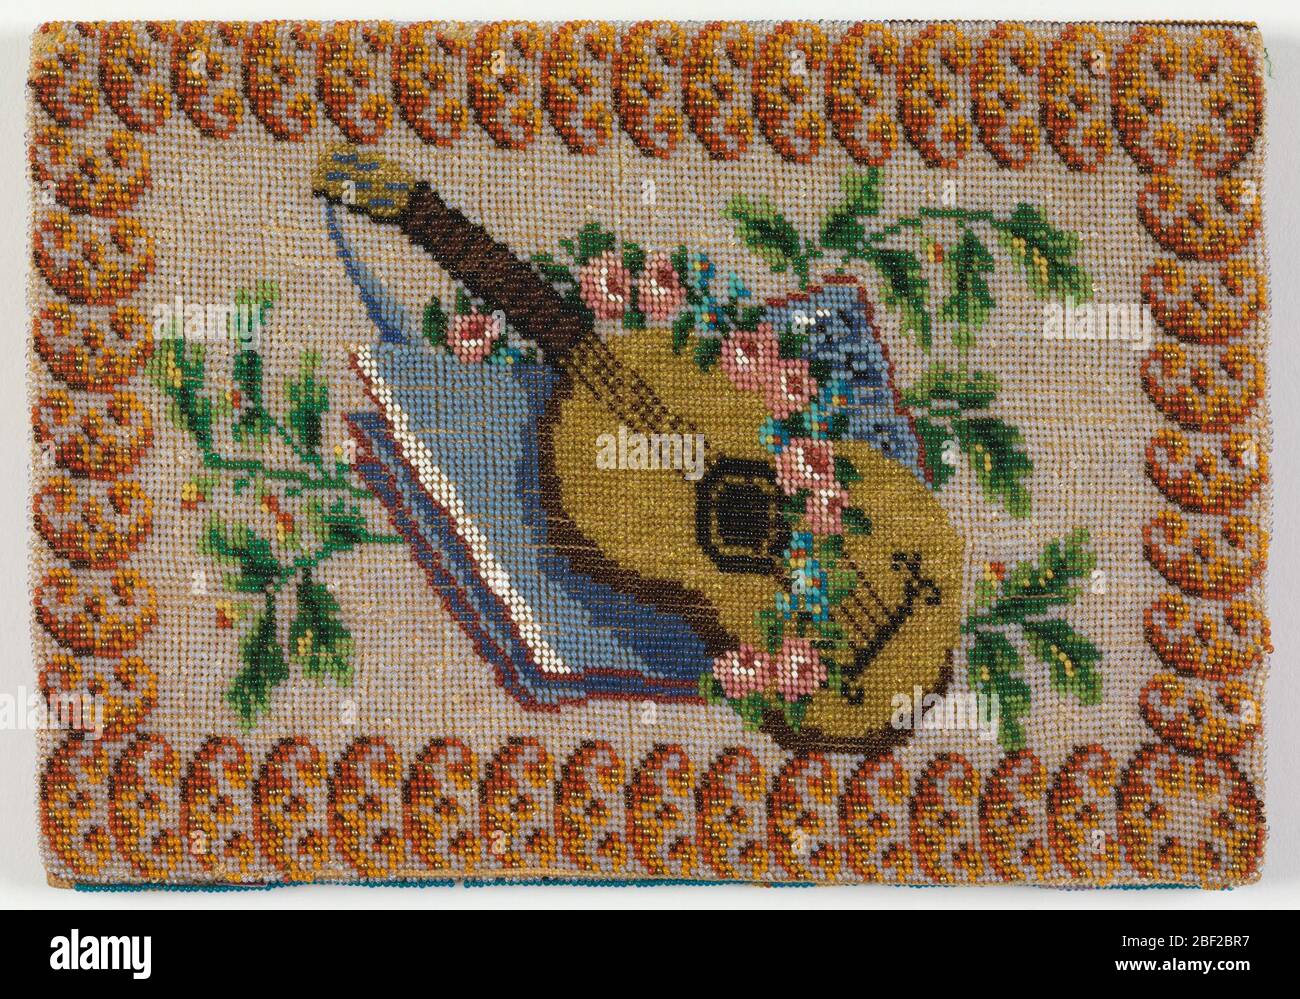 Notebook cover. Beaded fabric used to cover paper notebook. Image of a  guitar, book, bowl and flowers on a white ground with a border on one side  and a leaf pattern in